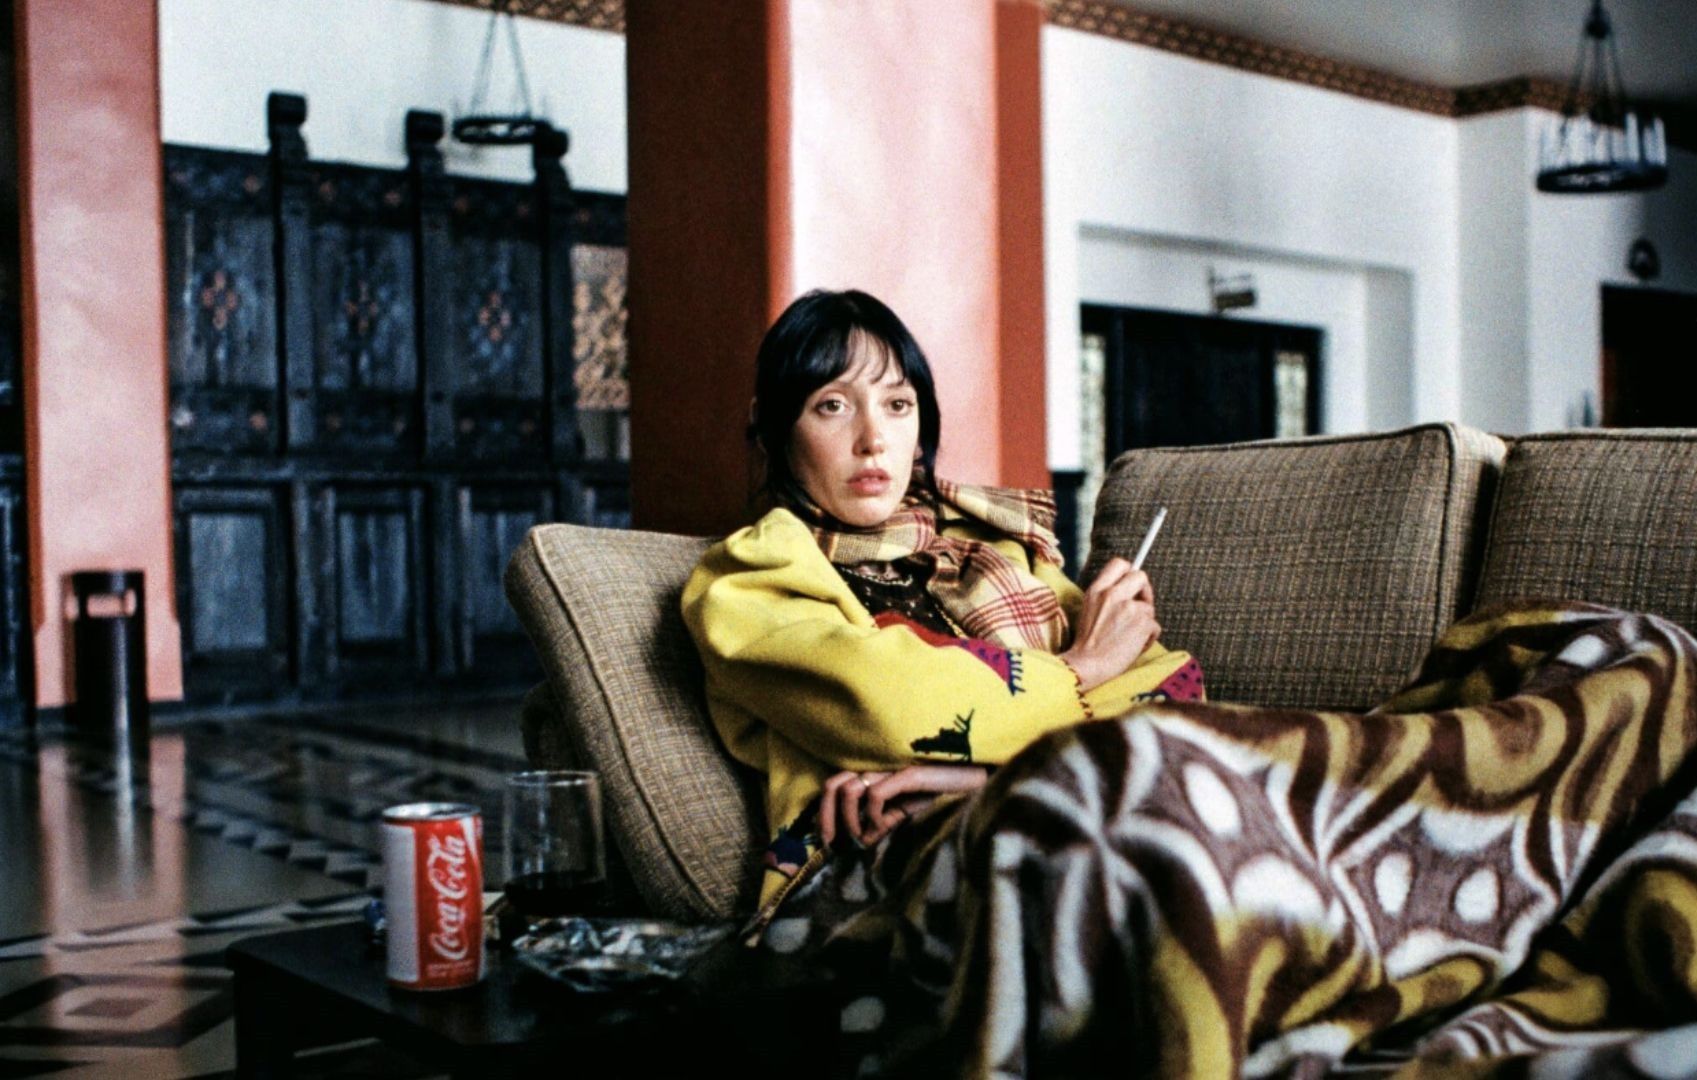 'The Shining' star Shelley Duvall dies aged 75